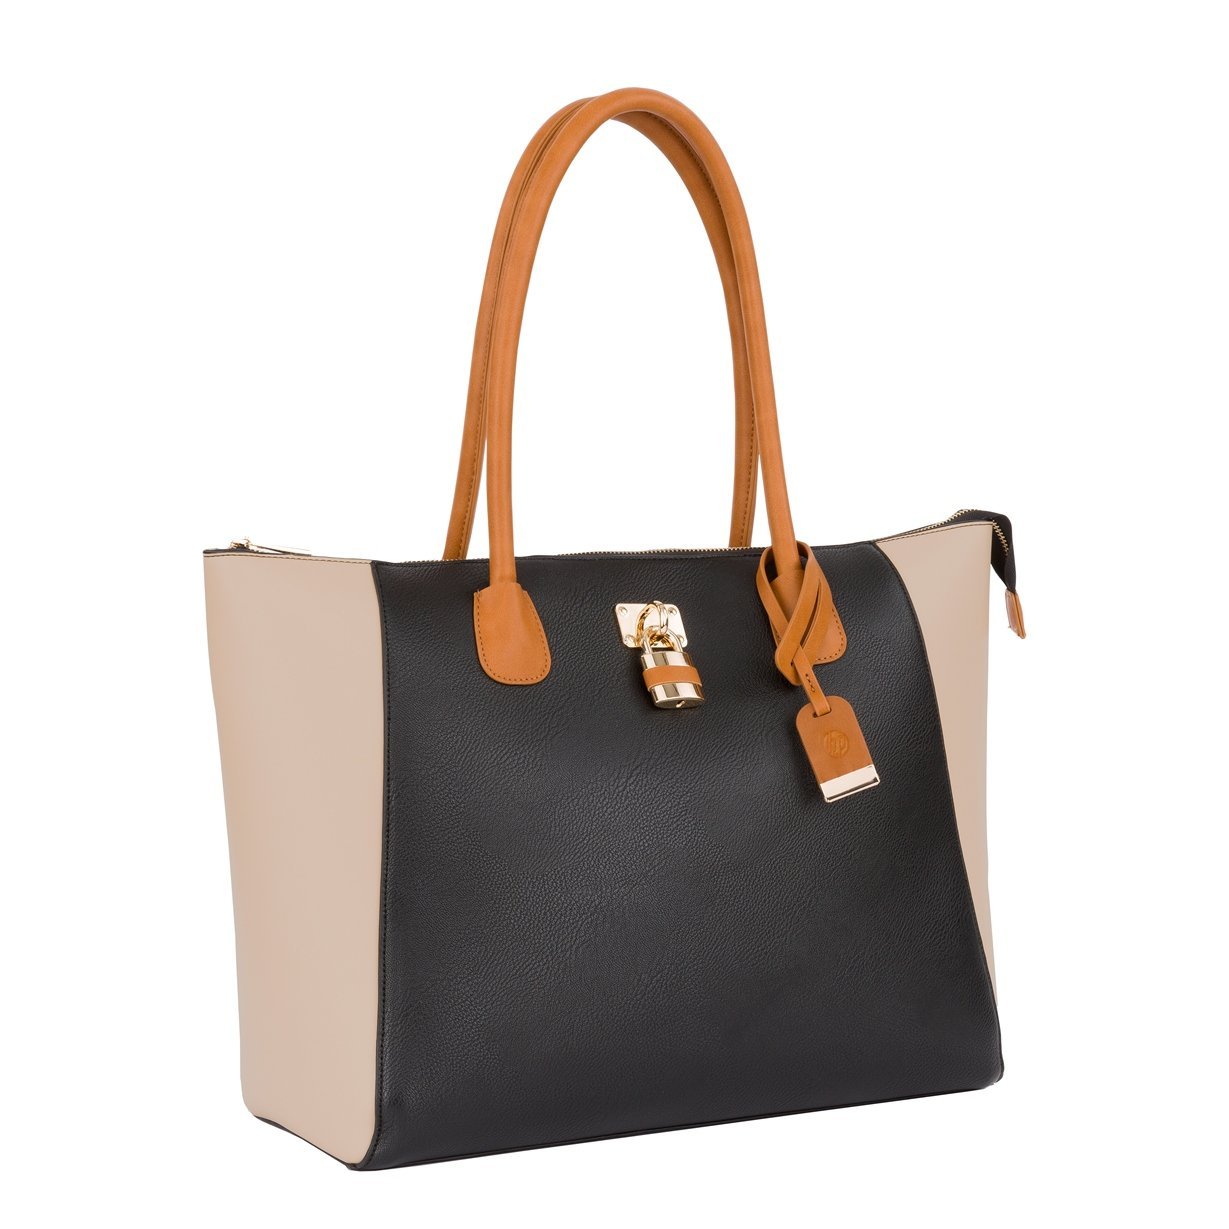 Bolso Tipo Tote Portalaptop Carry All Beige/ Negro Hp